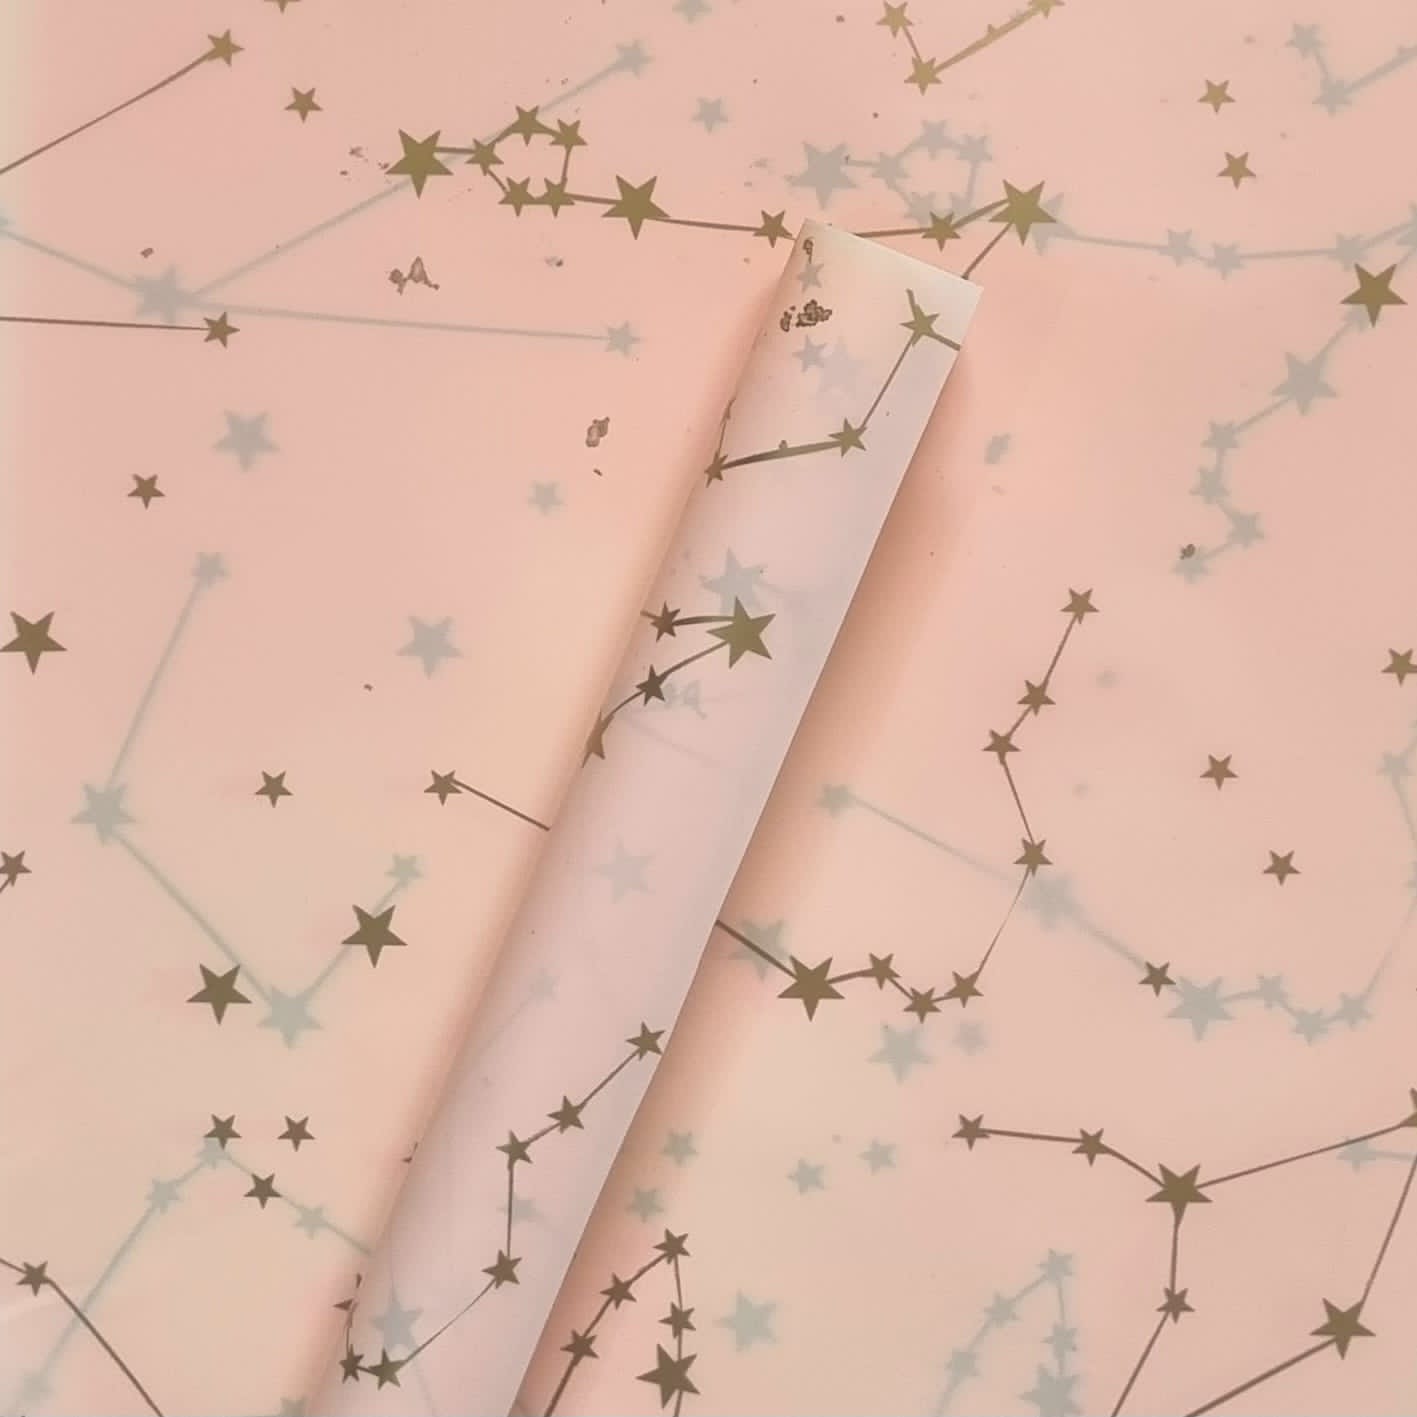 Ravrai Craft Starry Sky Milky Way large Size Gift Wrapping Paper